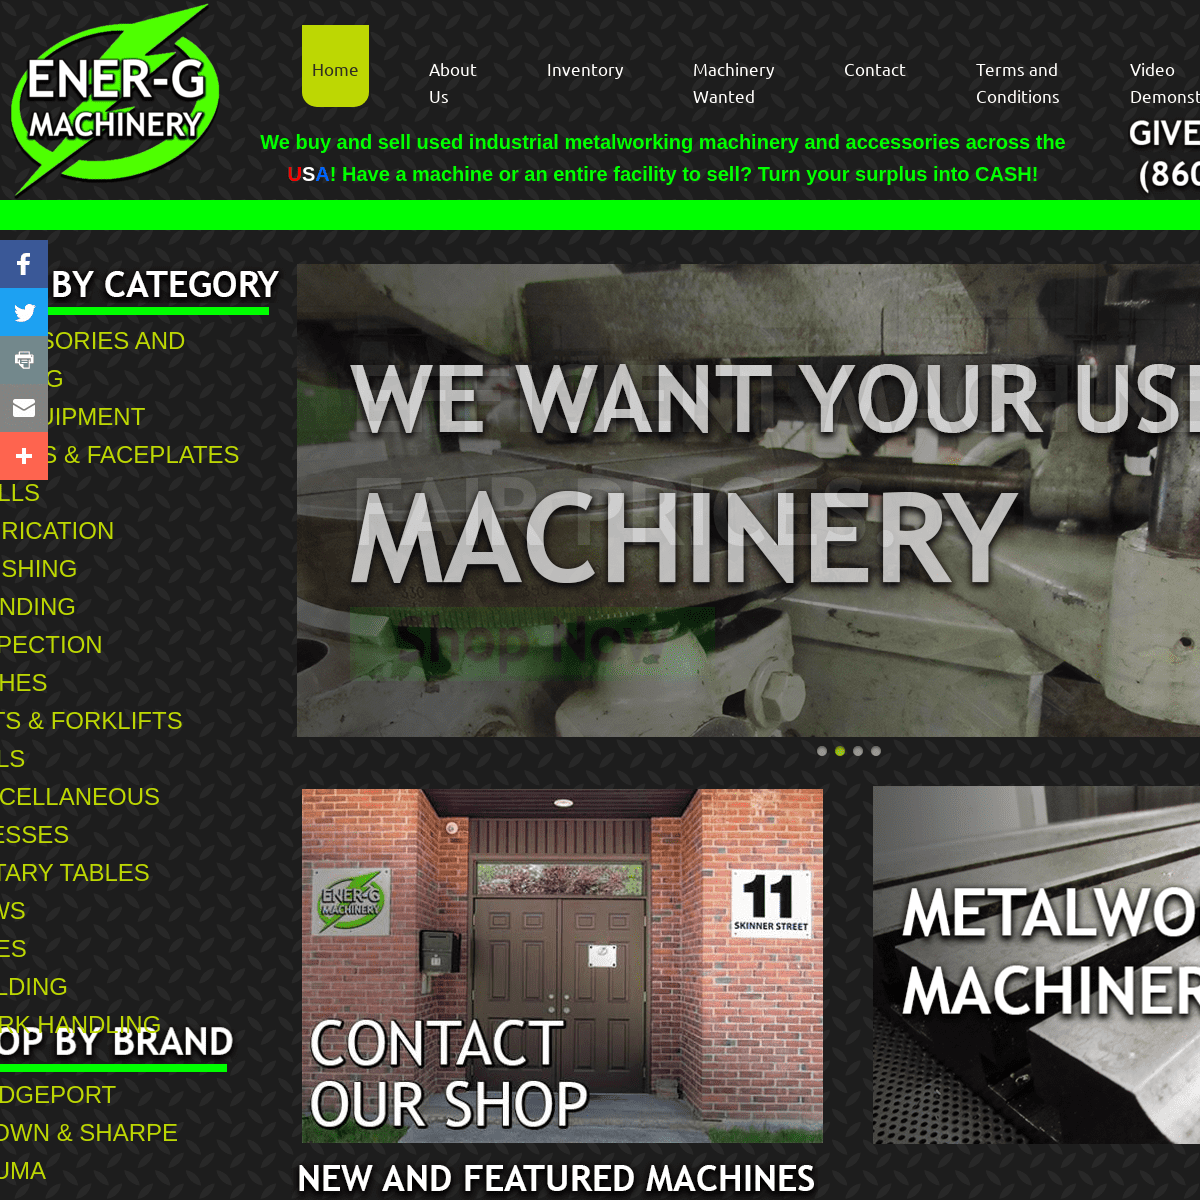 A complete backup of energmachinery.com